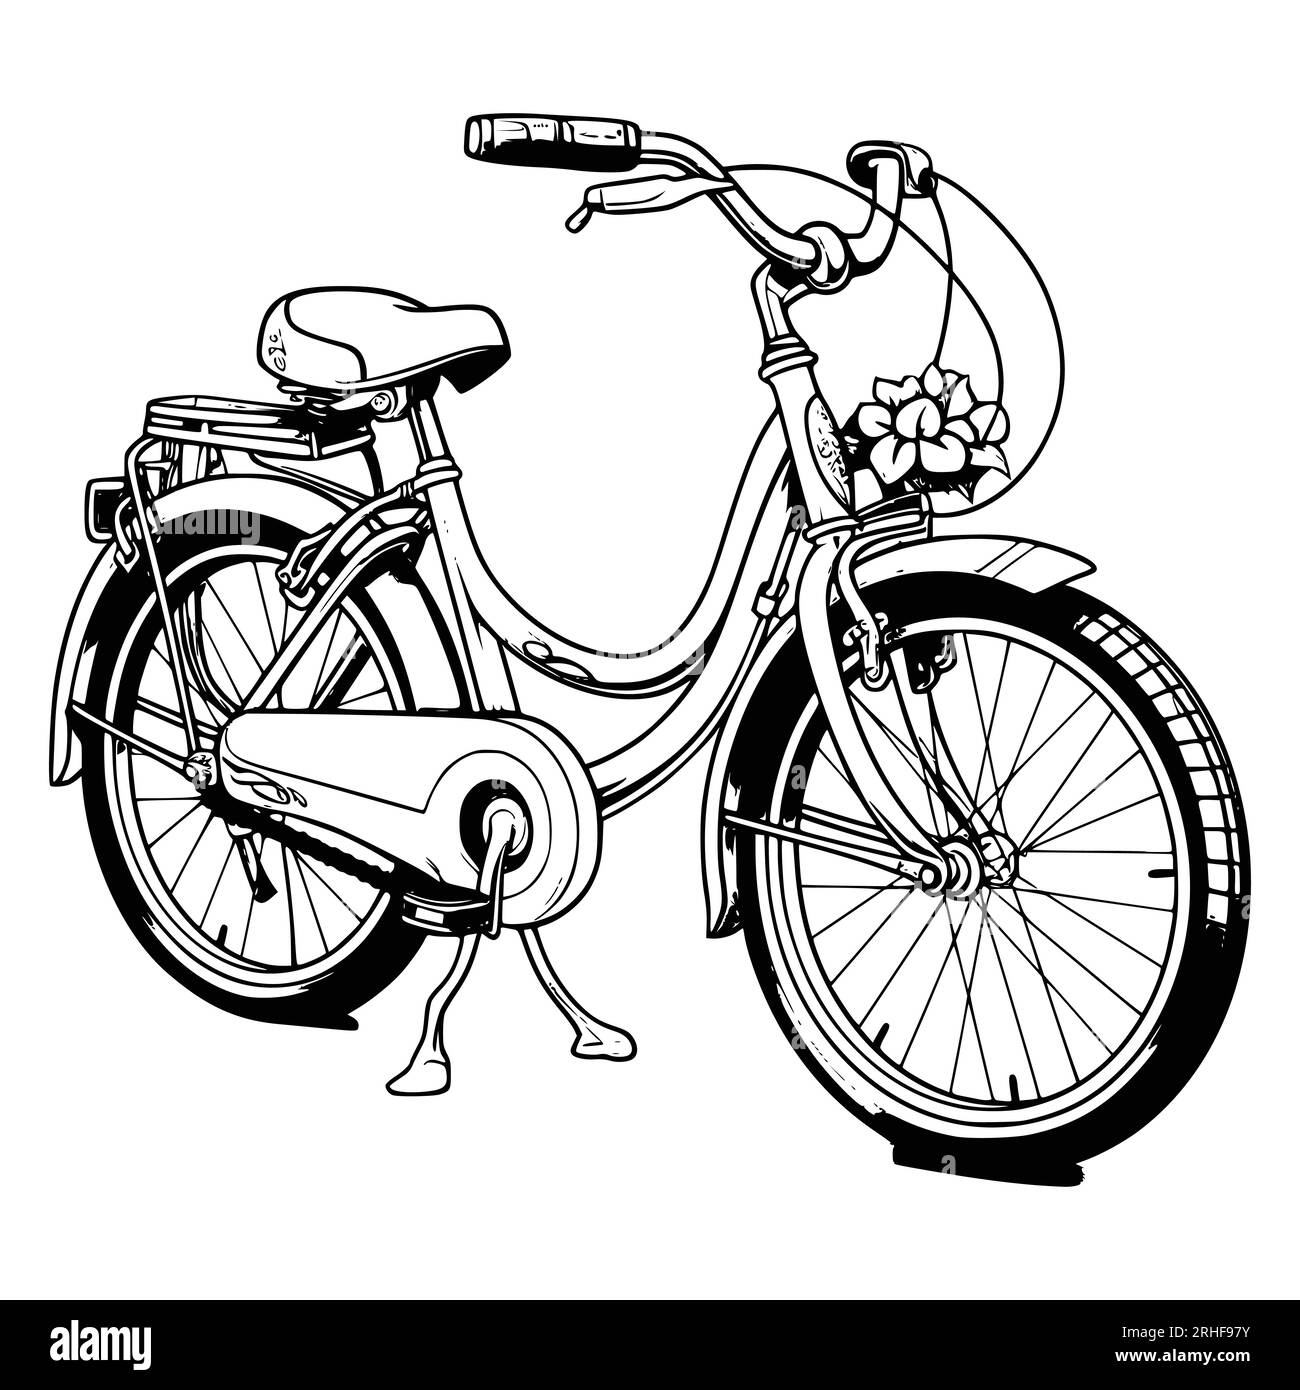 Bikes Coloring Page Drawing For Kids Stock Vector